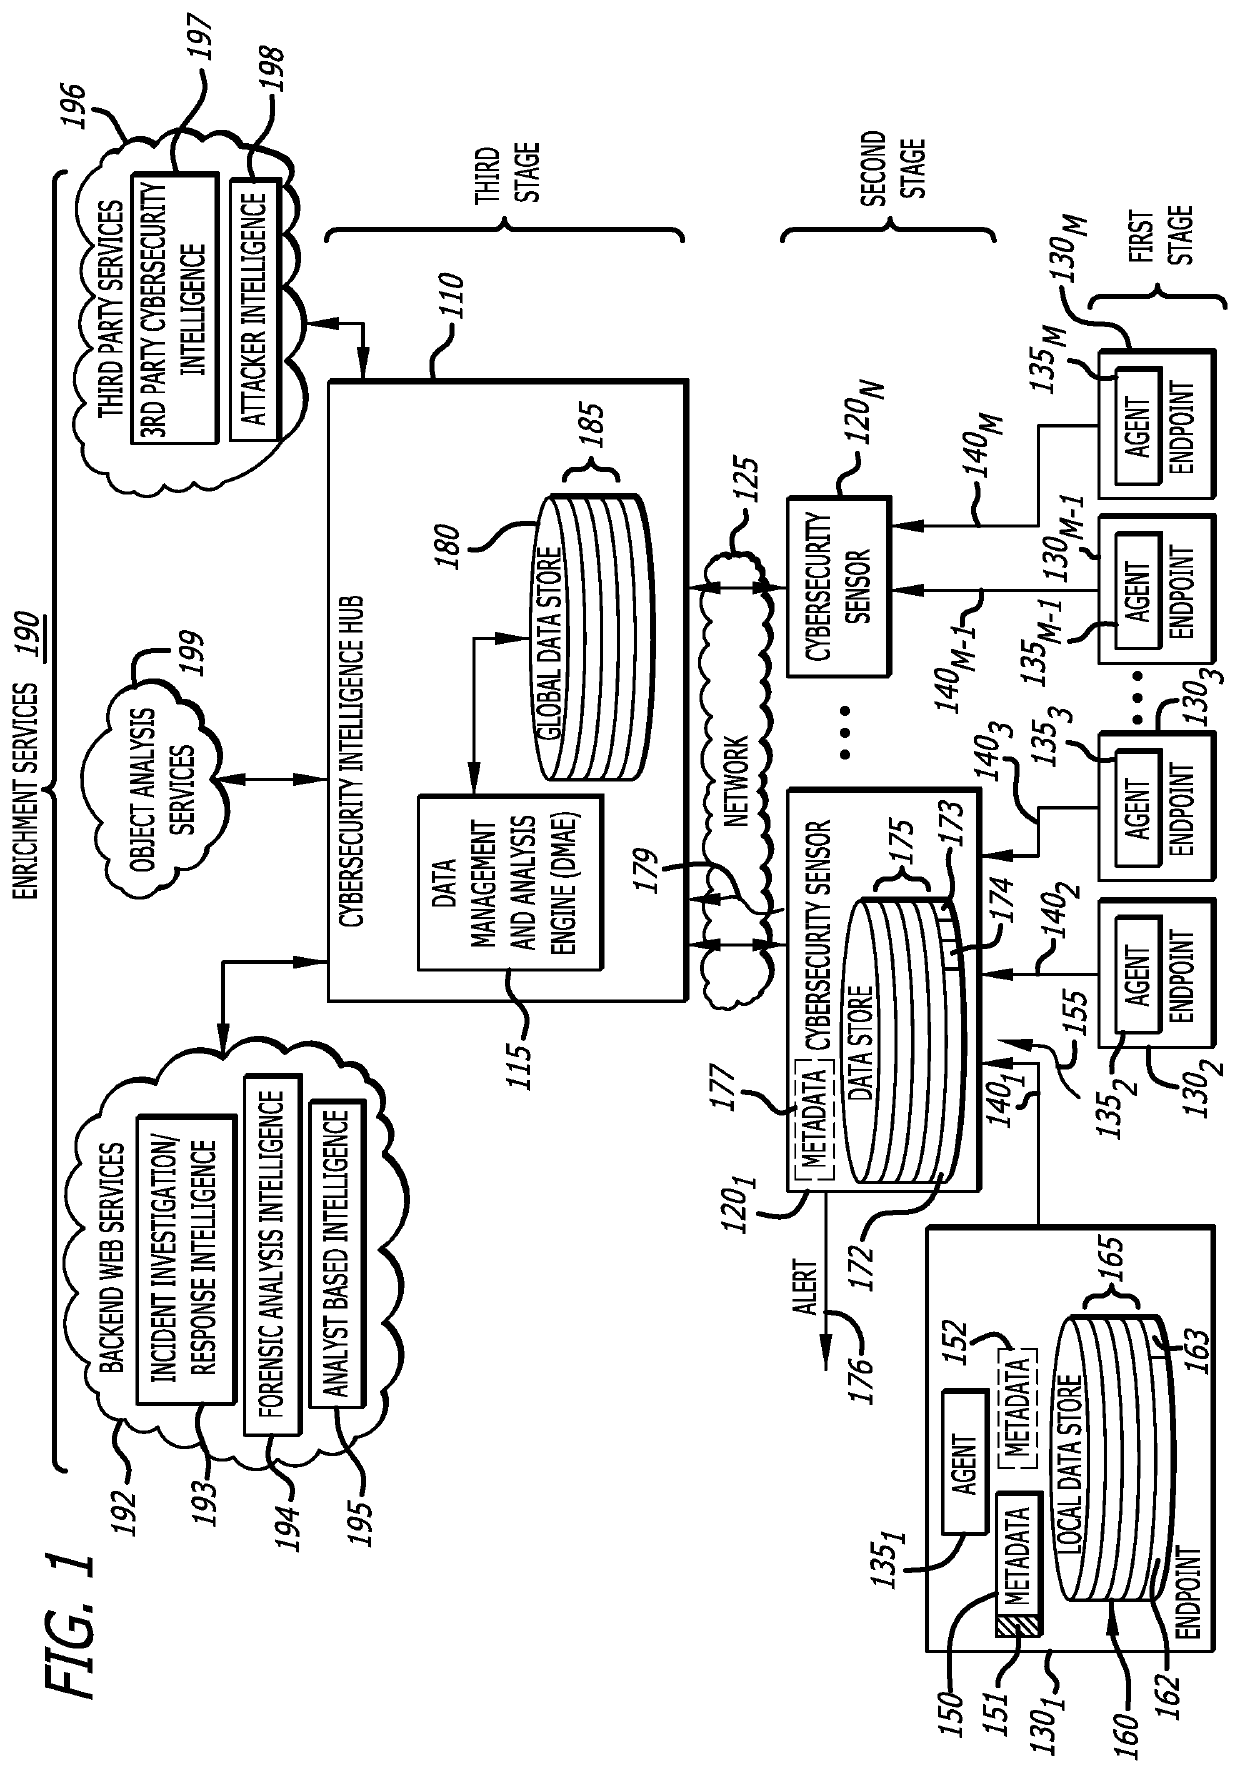 Method and system for efficient cybersecurity analysis of endpoint events